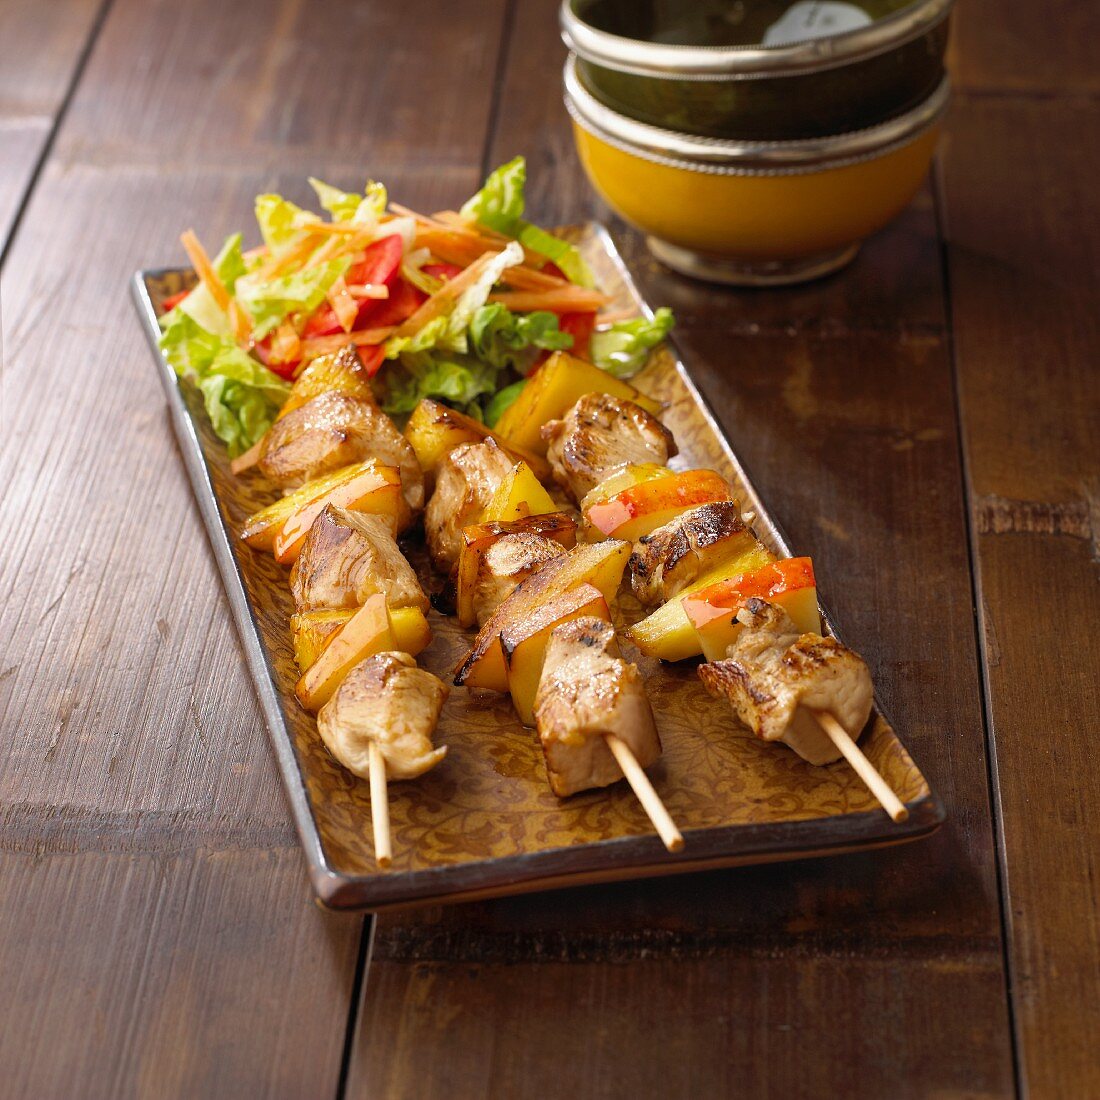 Fruity turkey satay skewers with apple and pineapple